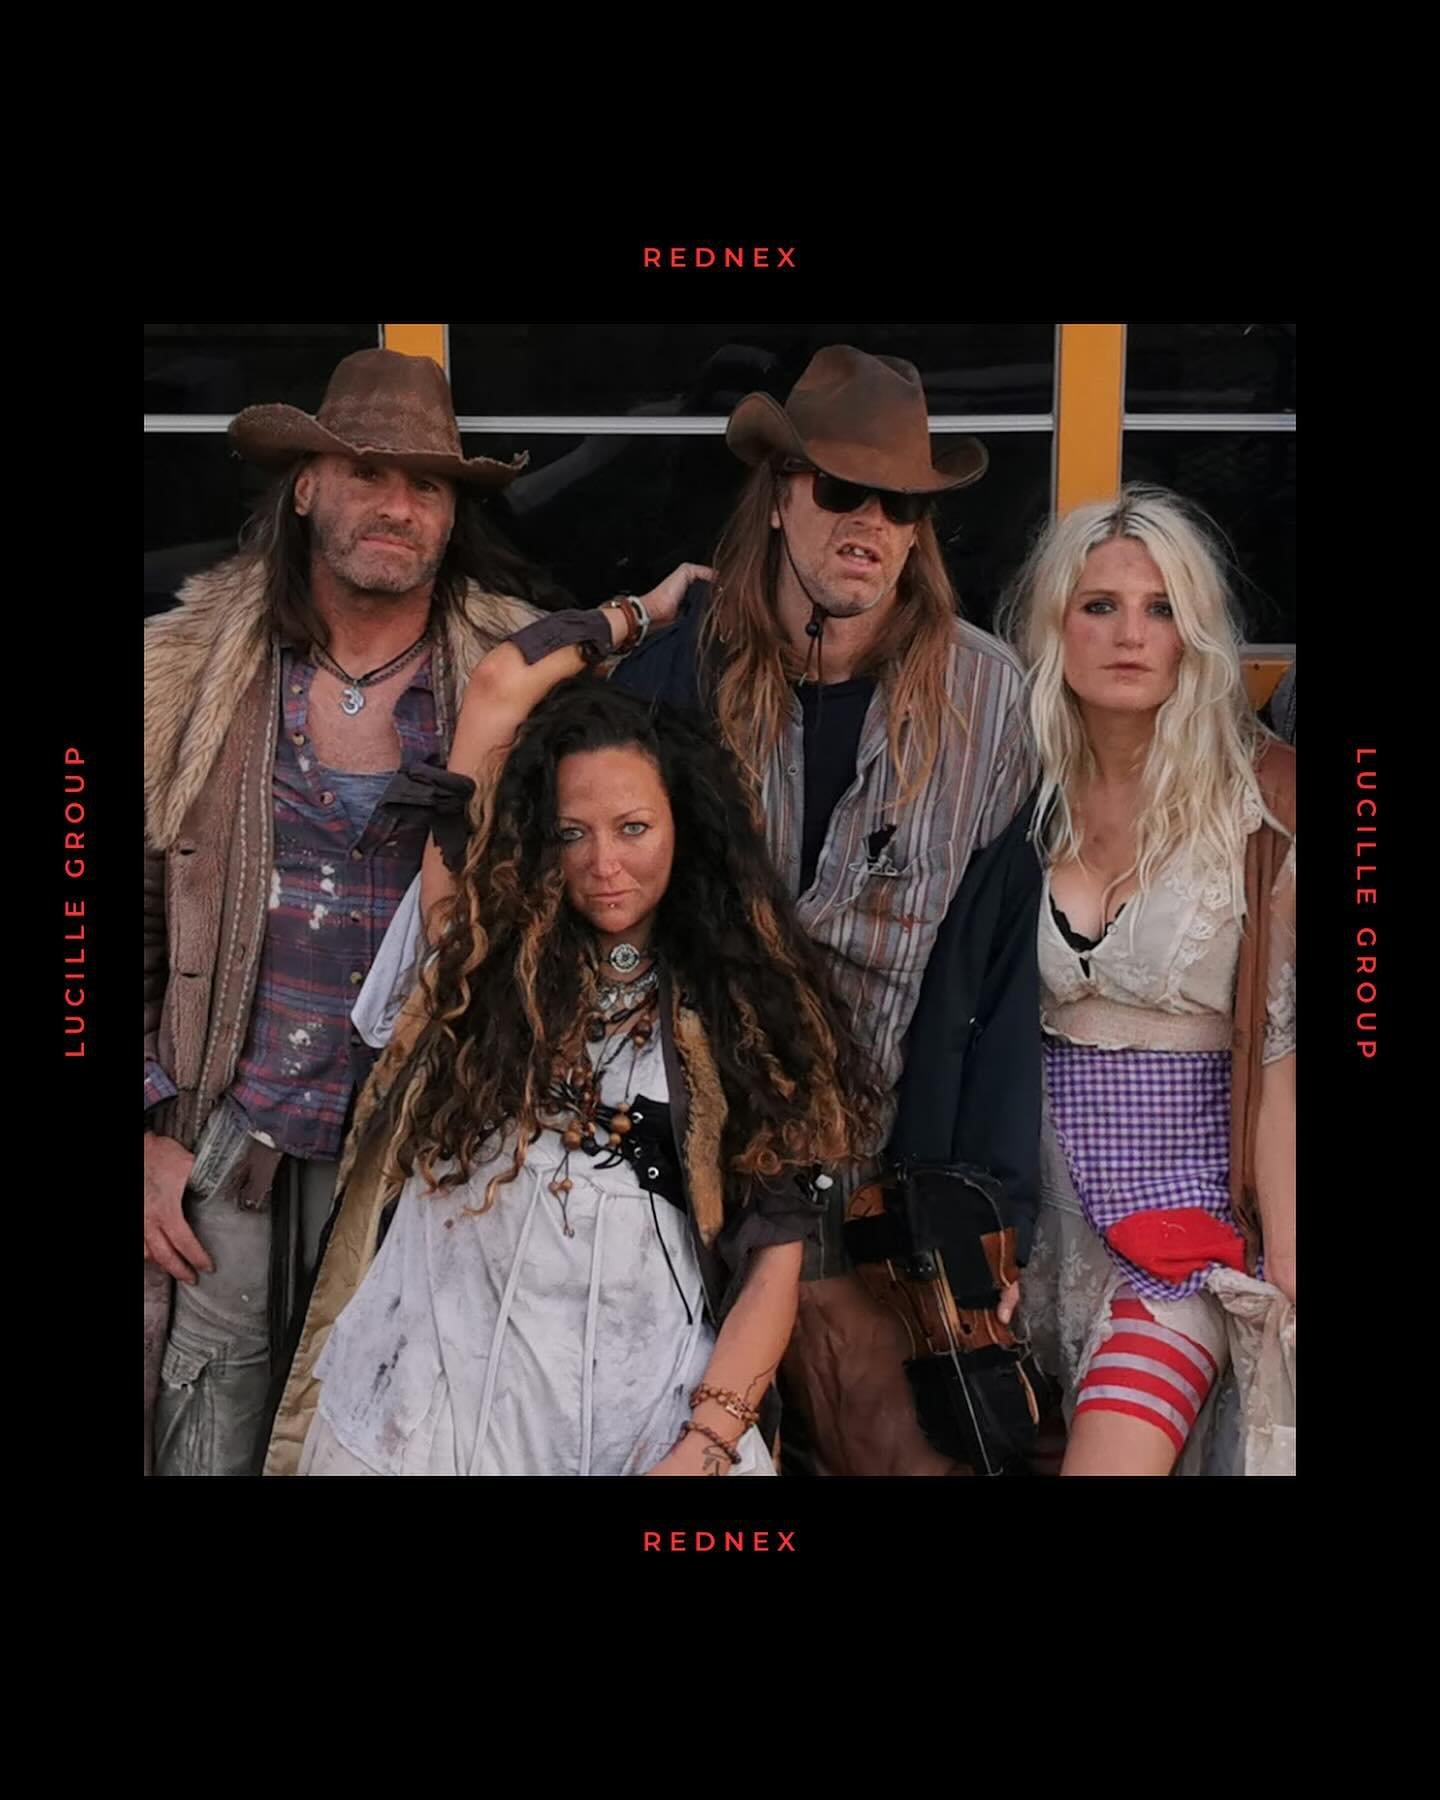 More than 3 billion views and a reach of 12% of all YouTube users in the world within less than a month - those are the world record breaking numbers that our partner Rednex has gotten on their YouTube channel lately. It is the good old classic &ldqu